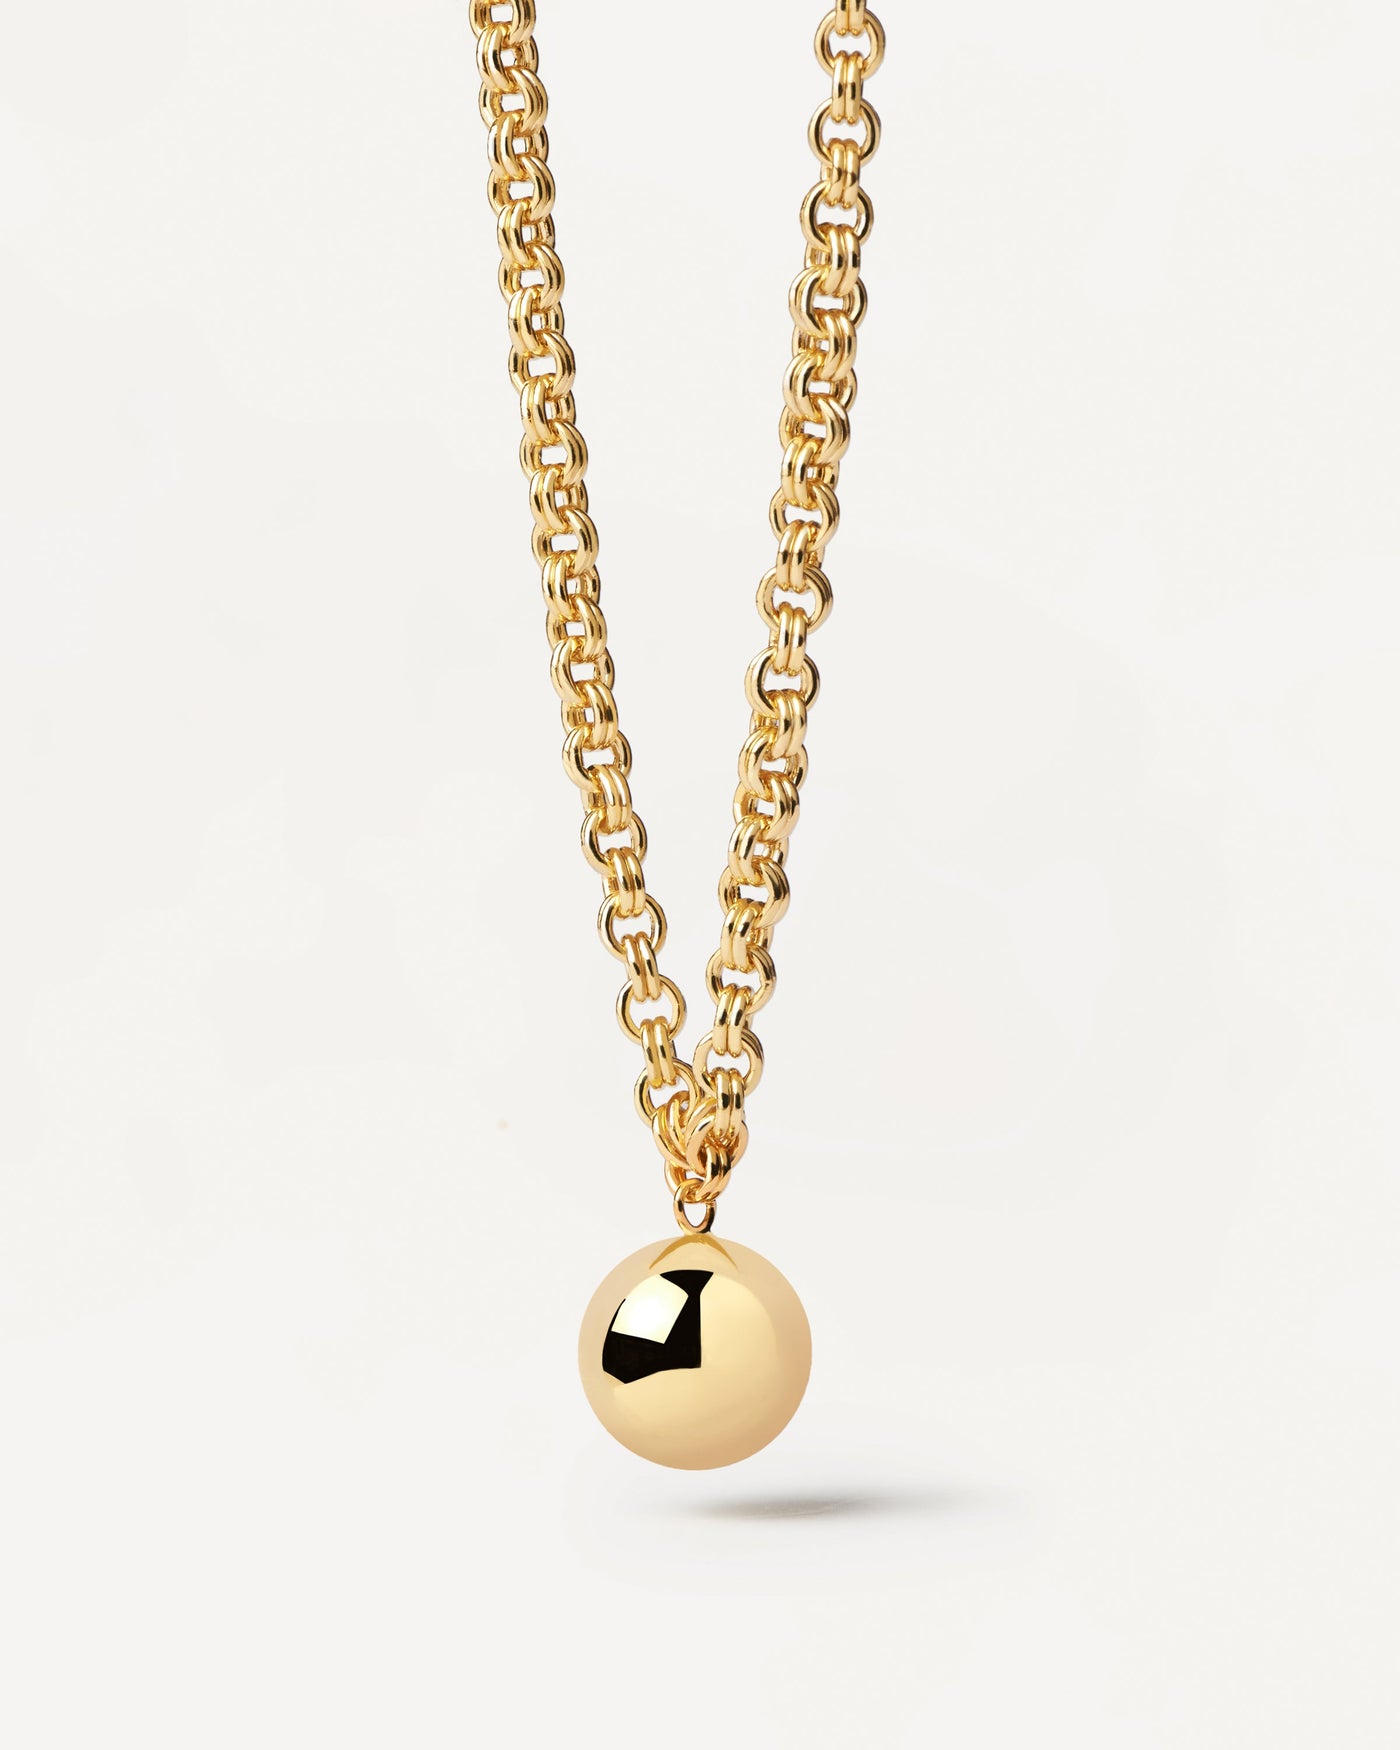 2023 Selection | Super Future Necklace. Gold-plated silver chain necklace with a hanging ball pendant. Get the latest arrival from PDPAOLA. Place your order safely and get this Best Seller. Free Shipping.